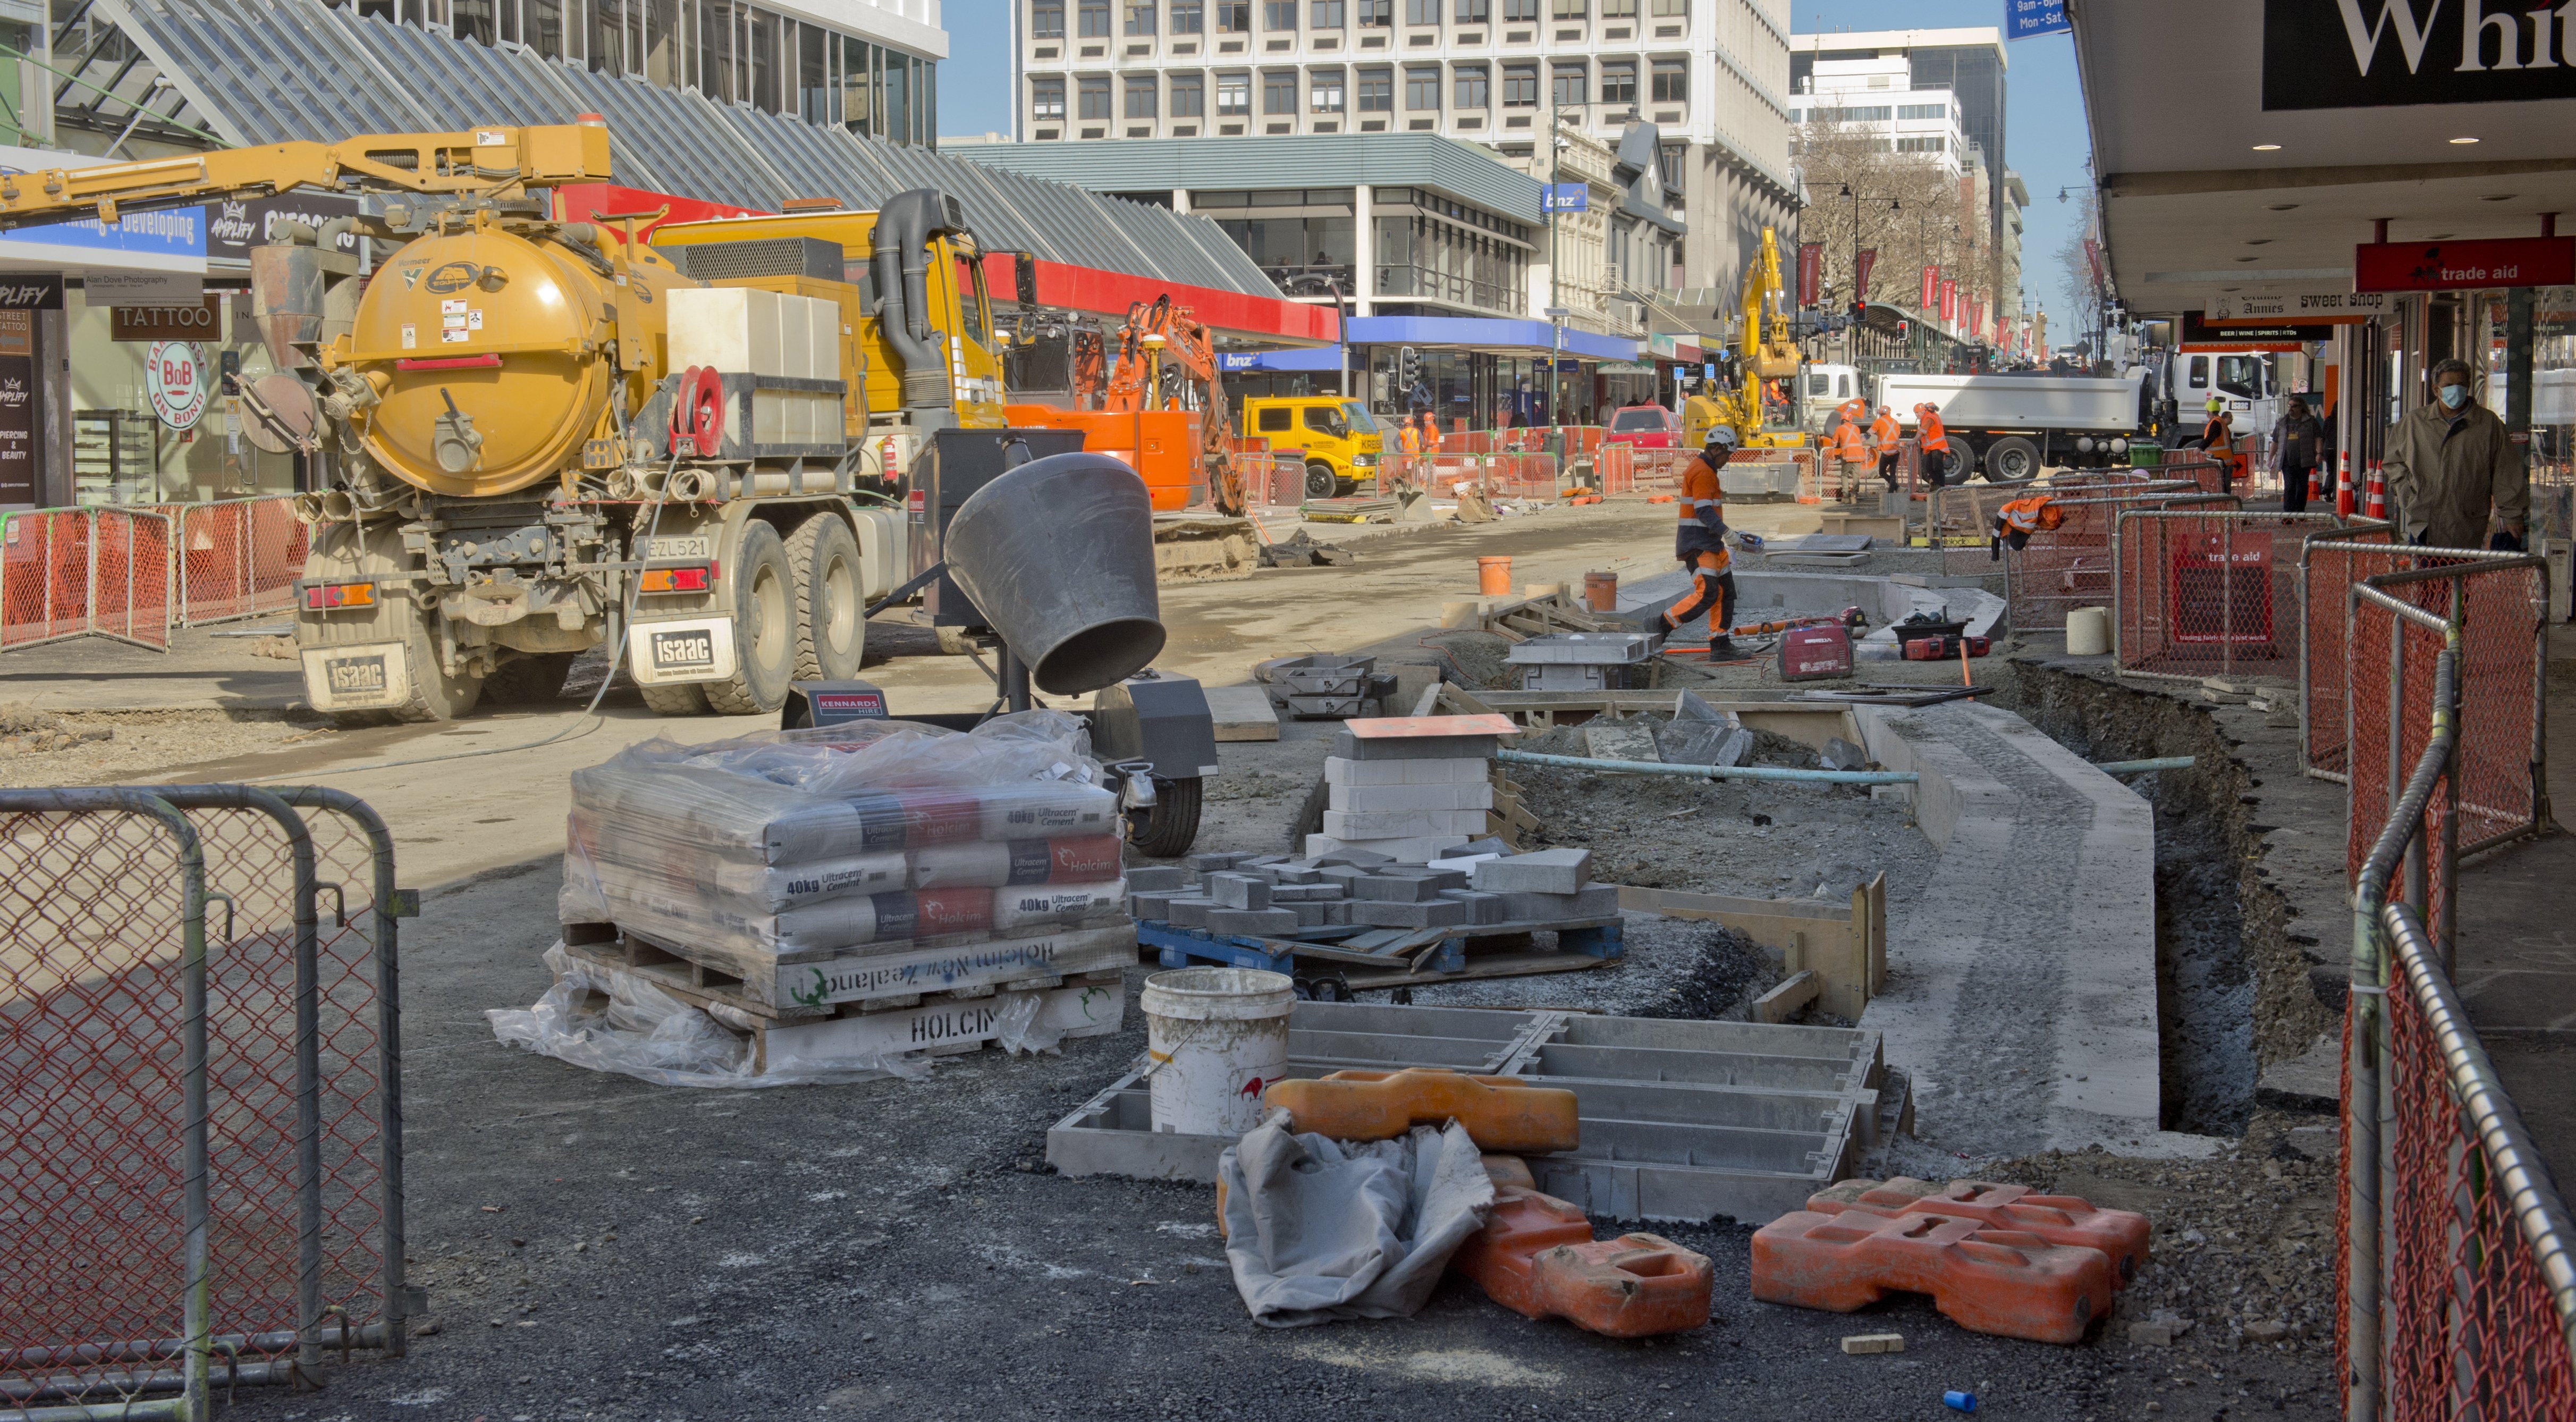 The makeover of George St, in Dunedin, continues. PHOTO: GERARD O’BRIEN